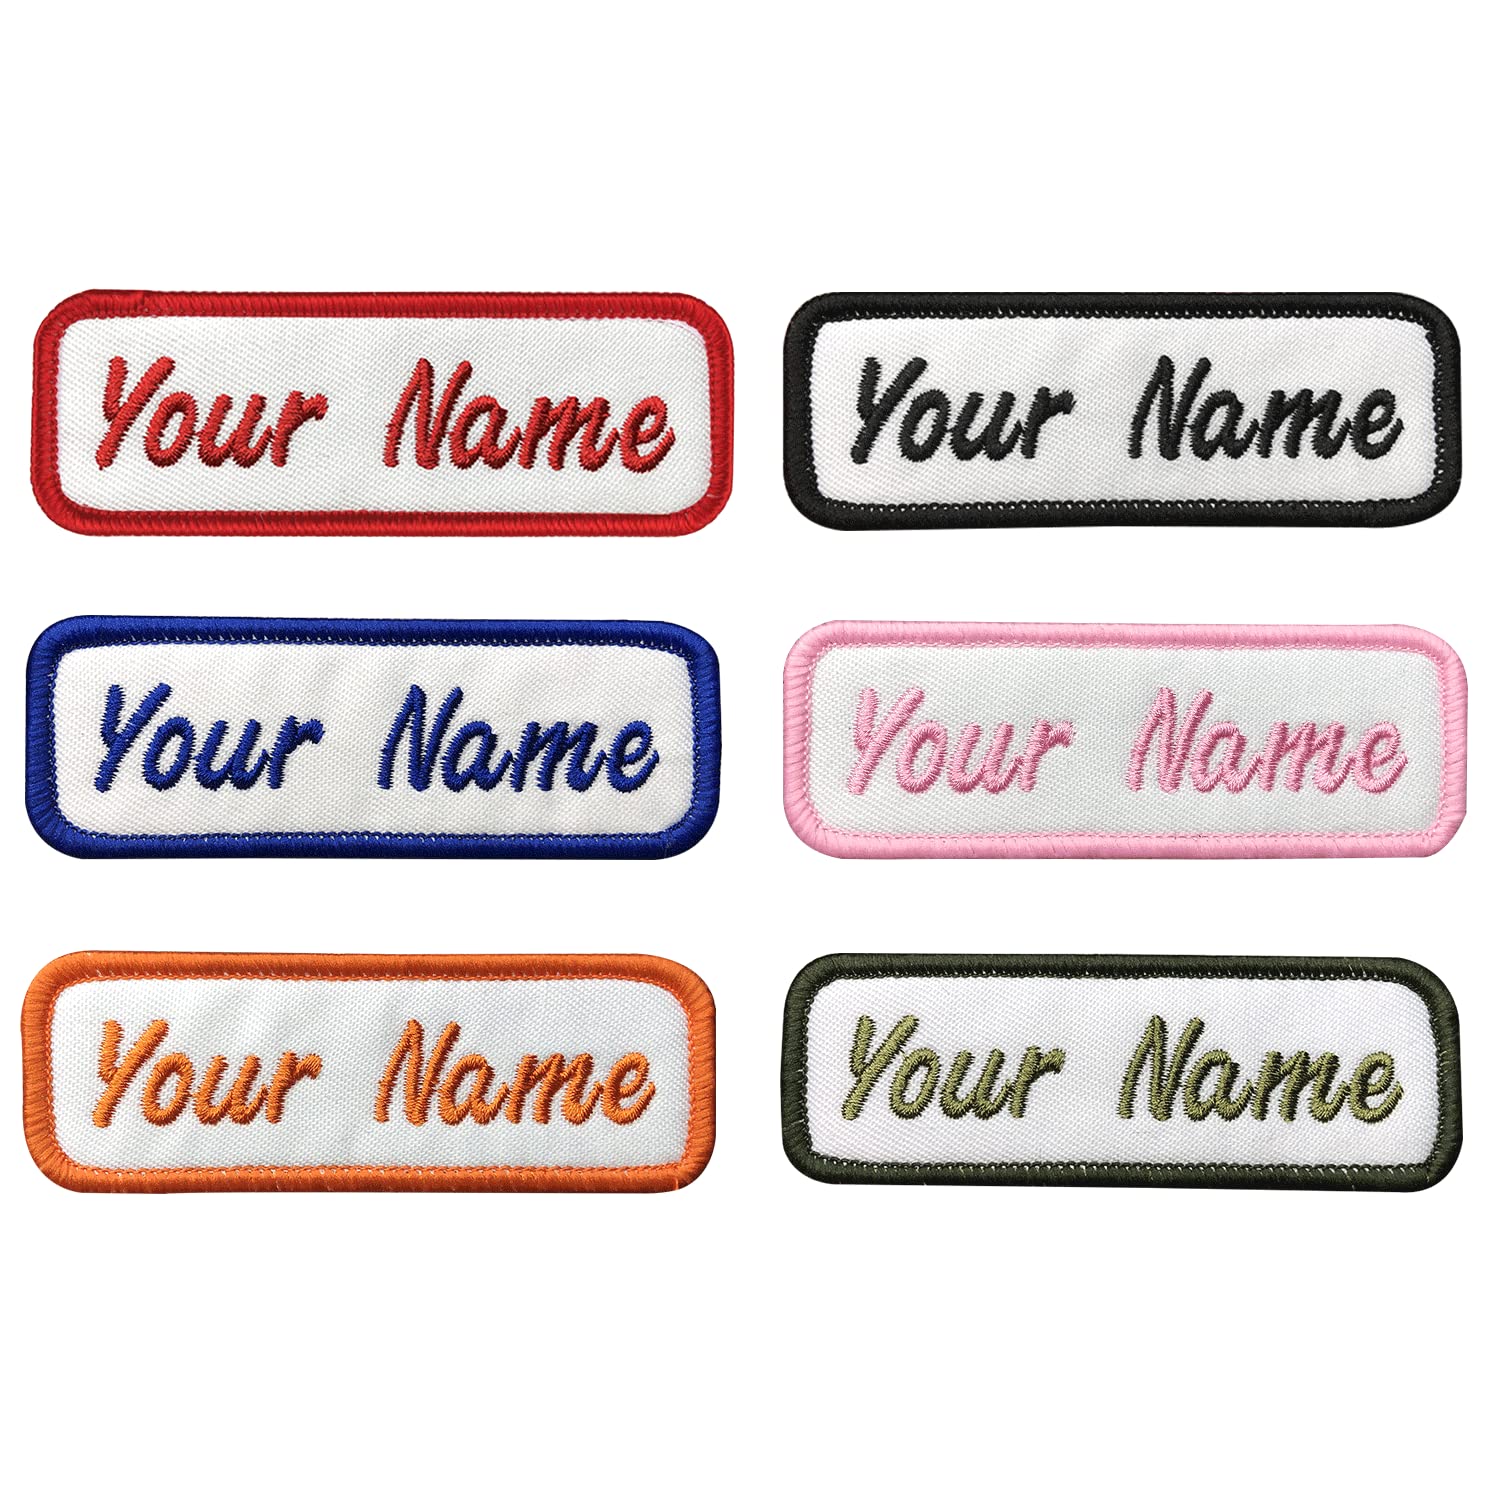 Custom Name Patch, 2pcs Personalized Embroidered Name tag, Sew on/Iron on  Patches Suit for Clothing Uniform Work Shirt Motorcycle Biker School Bag